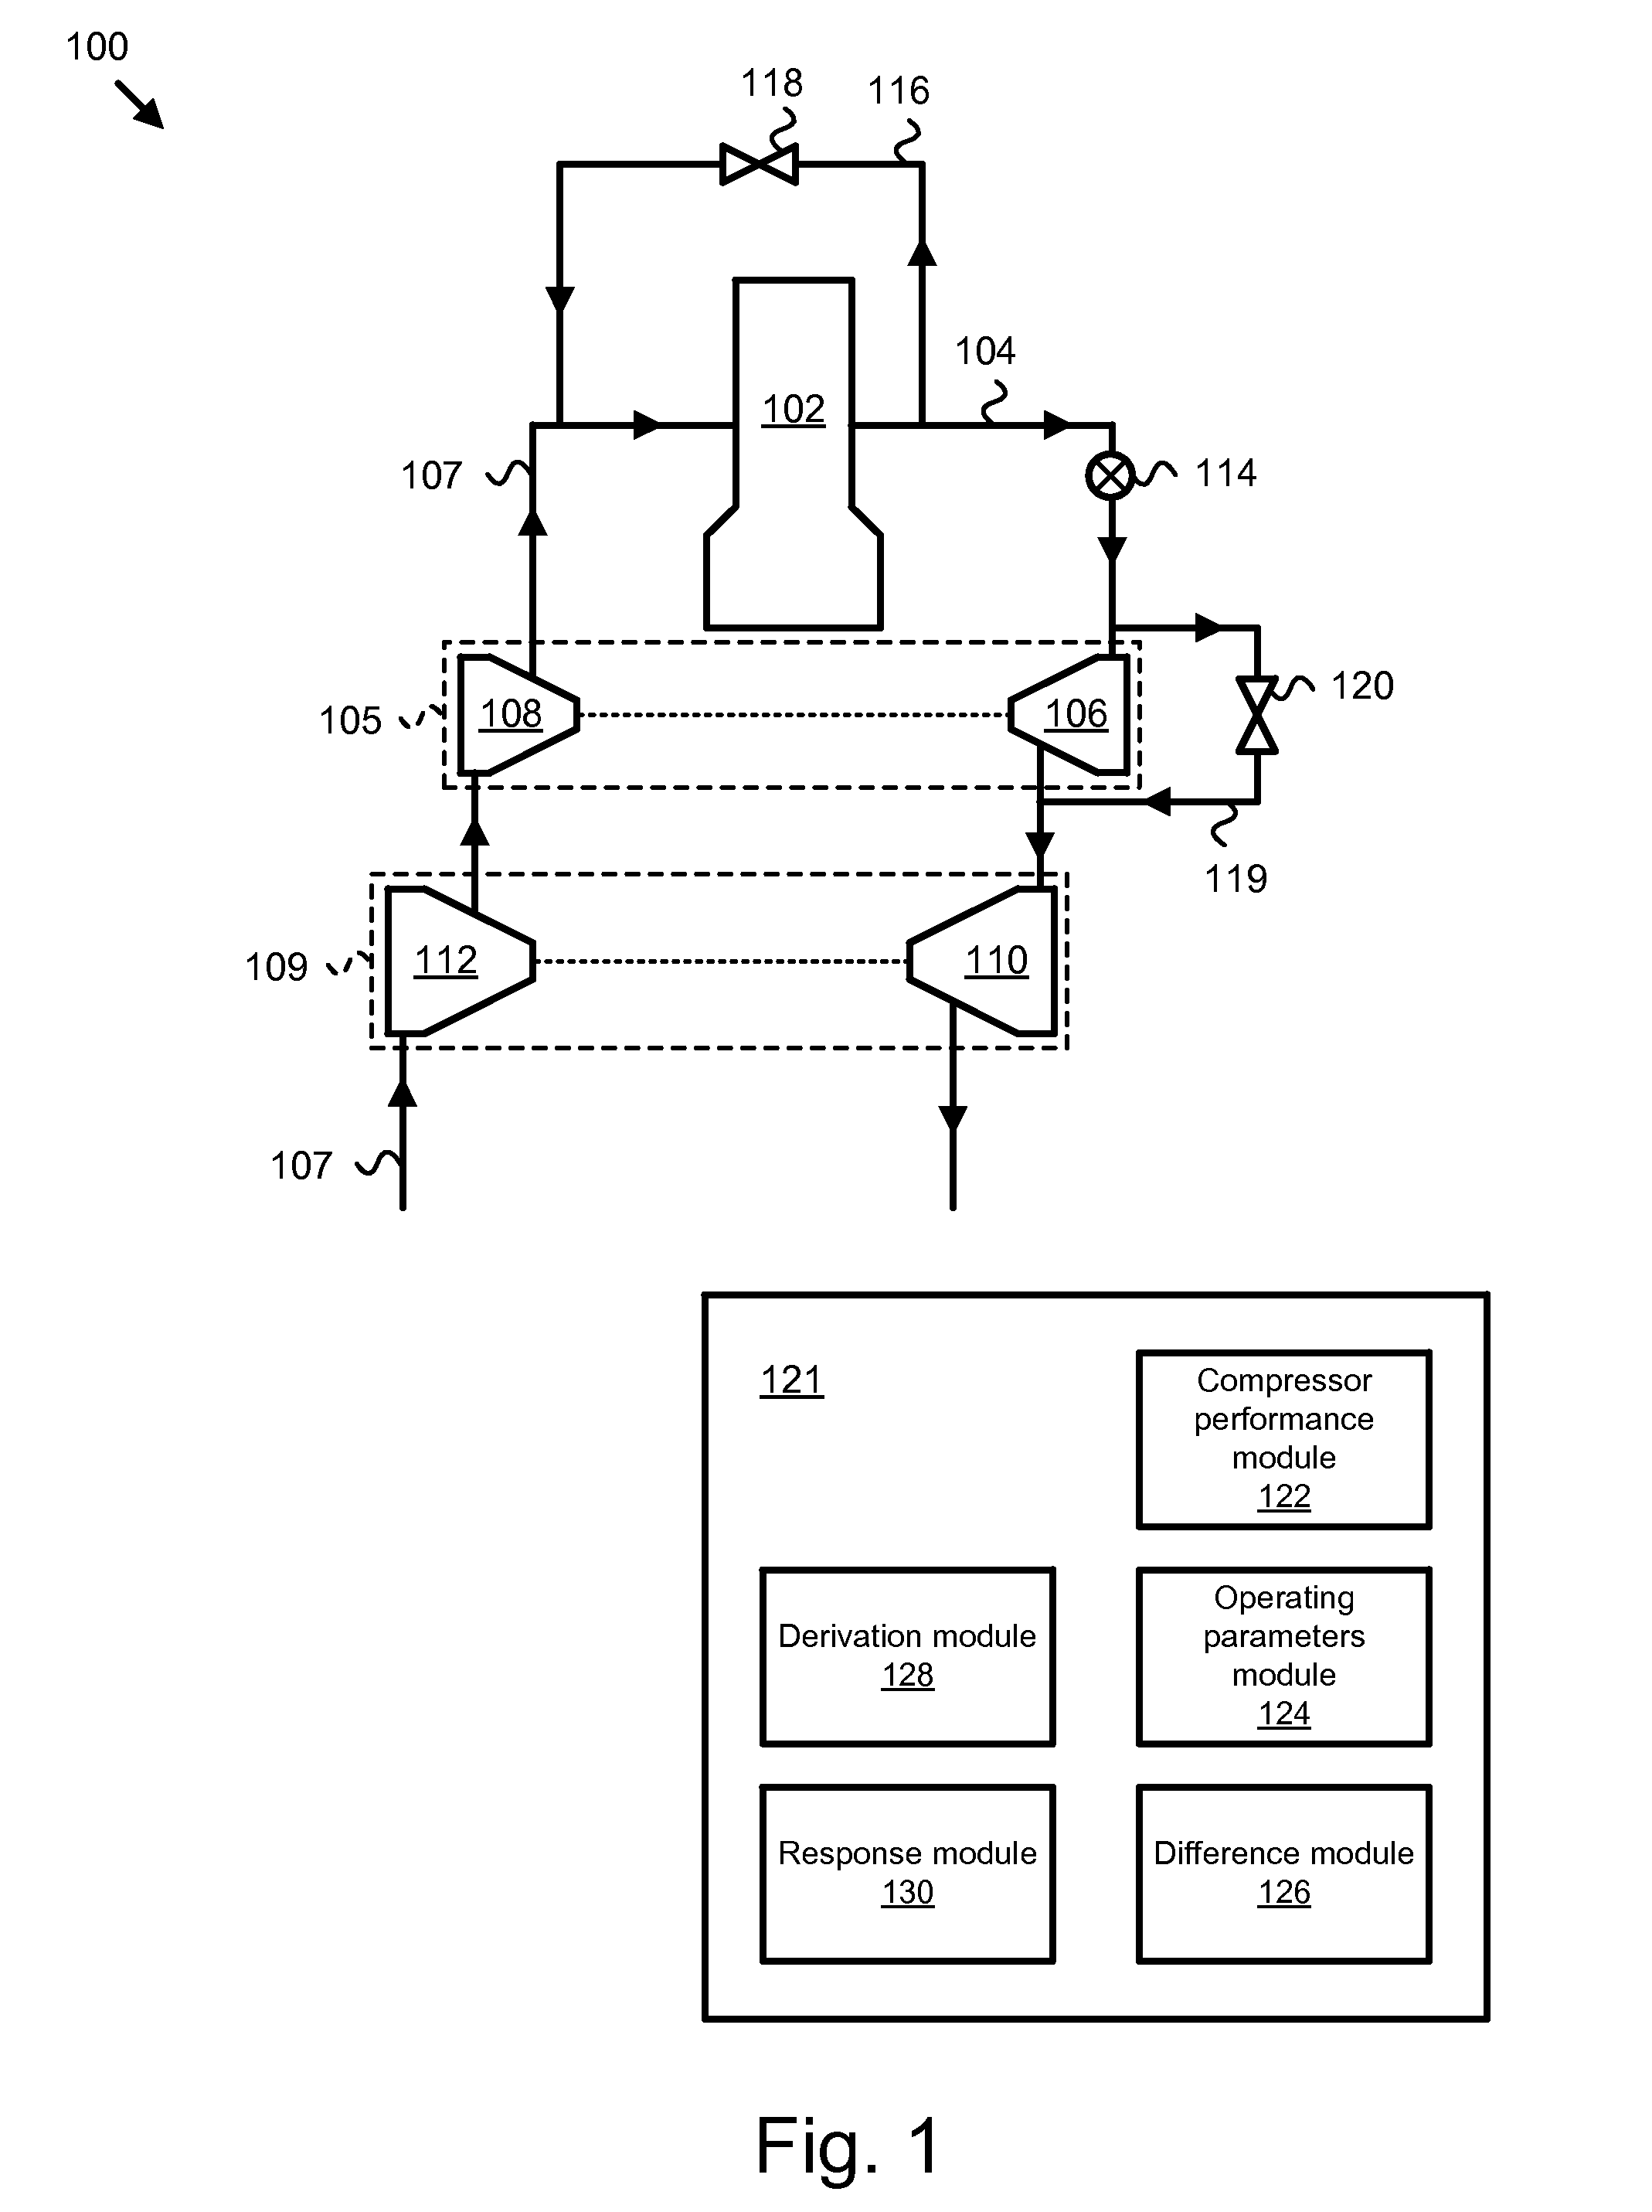 Apparatus, system, and method for predictive control of a turbocharger